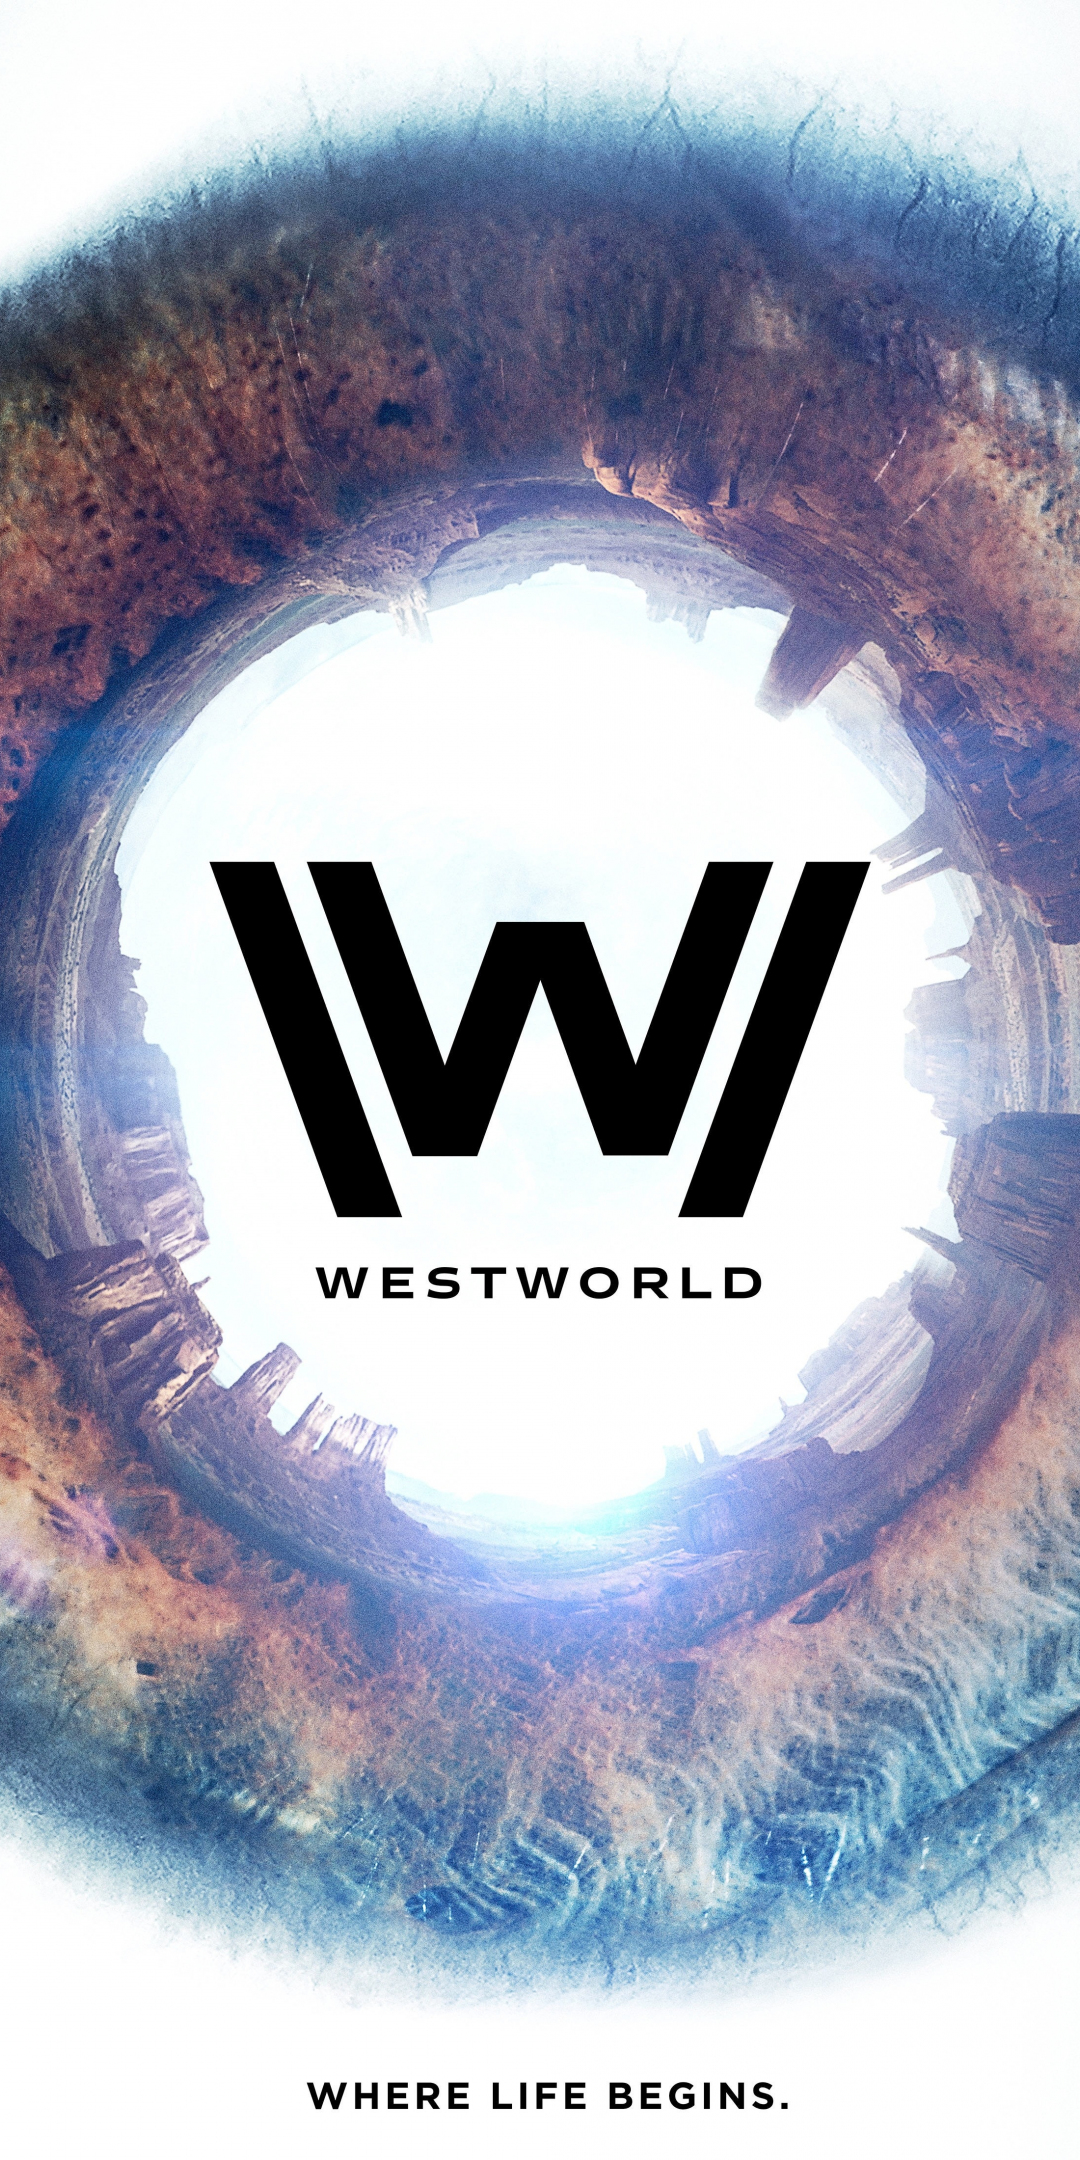 Westworld, mystery, sci-fi, tv show, poster, 2018, 1080x2160 wallpaper